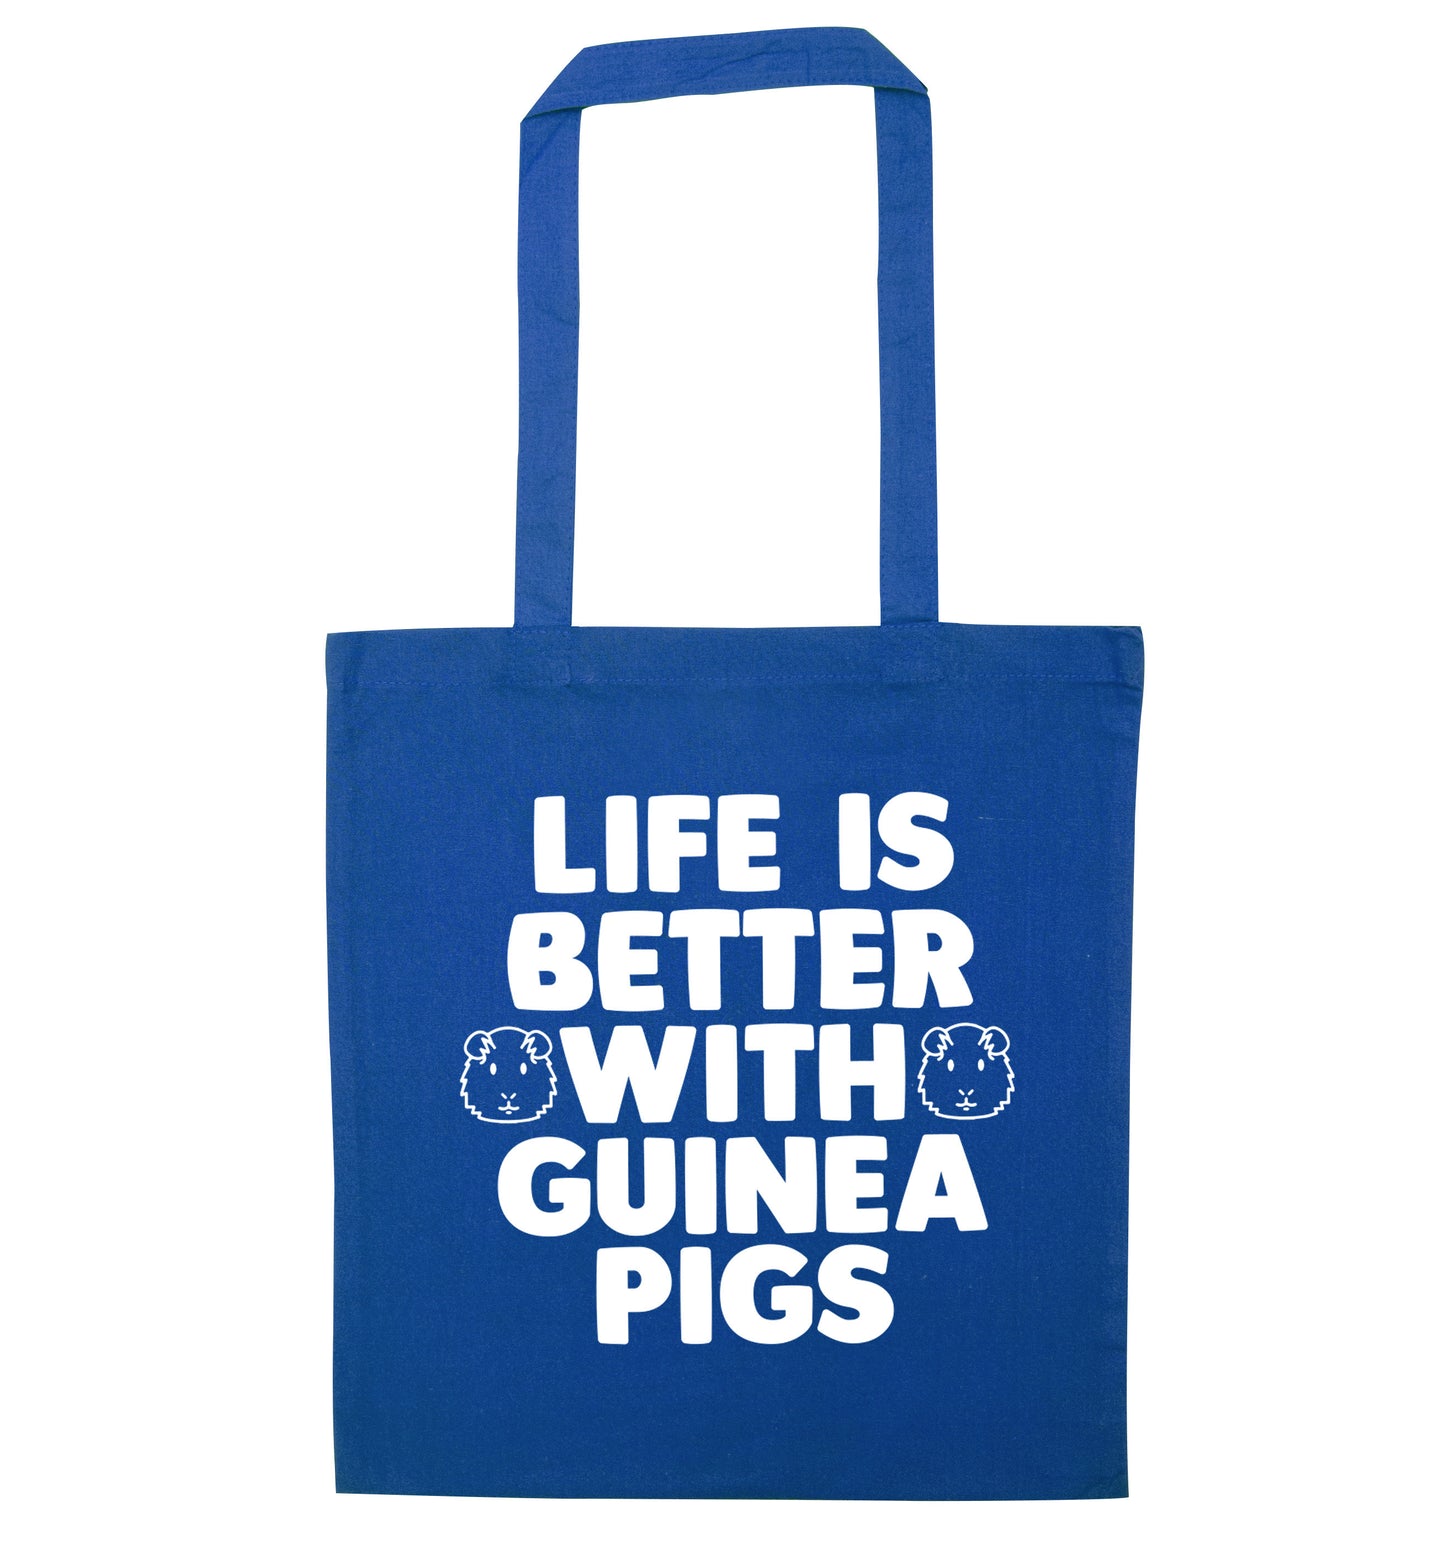 Life is better with guinea pigs blue tote bag